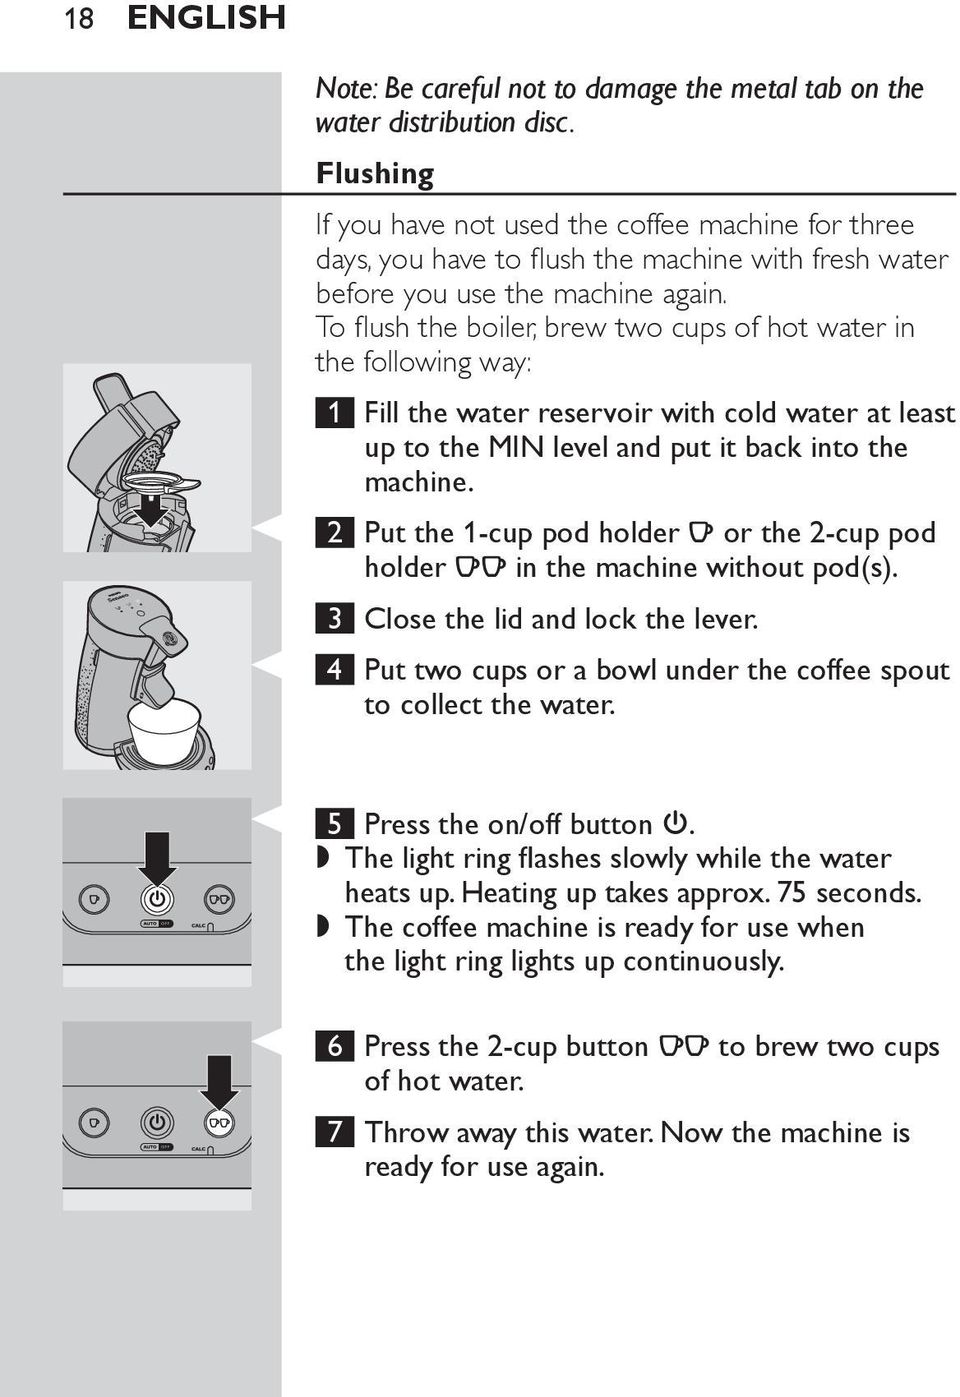 To flush the boiler, brew two cups of hot water in the following way: 1 Fill the water reservoir with cold water at least up to the MIN level and put it back into the machine.